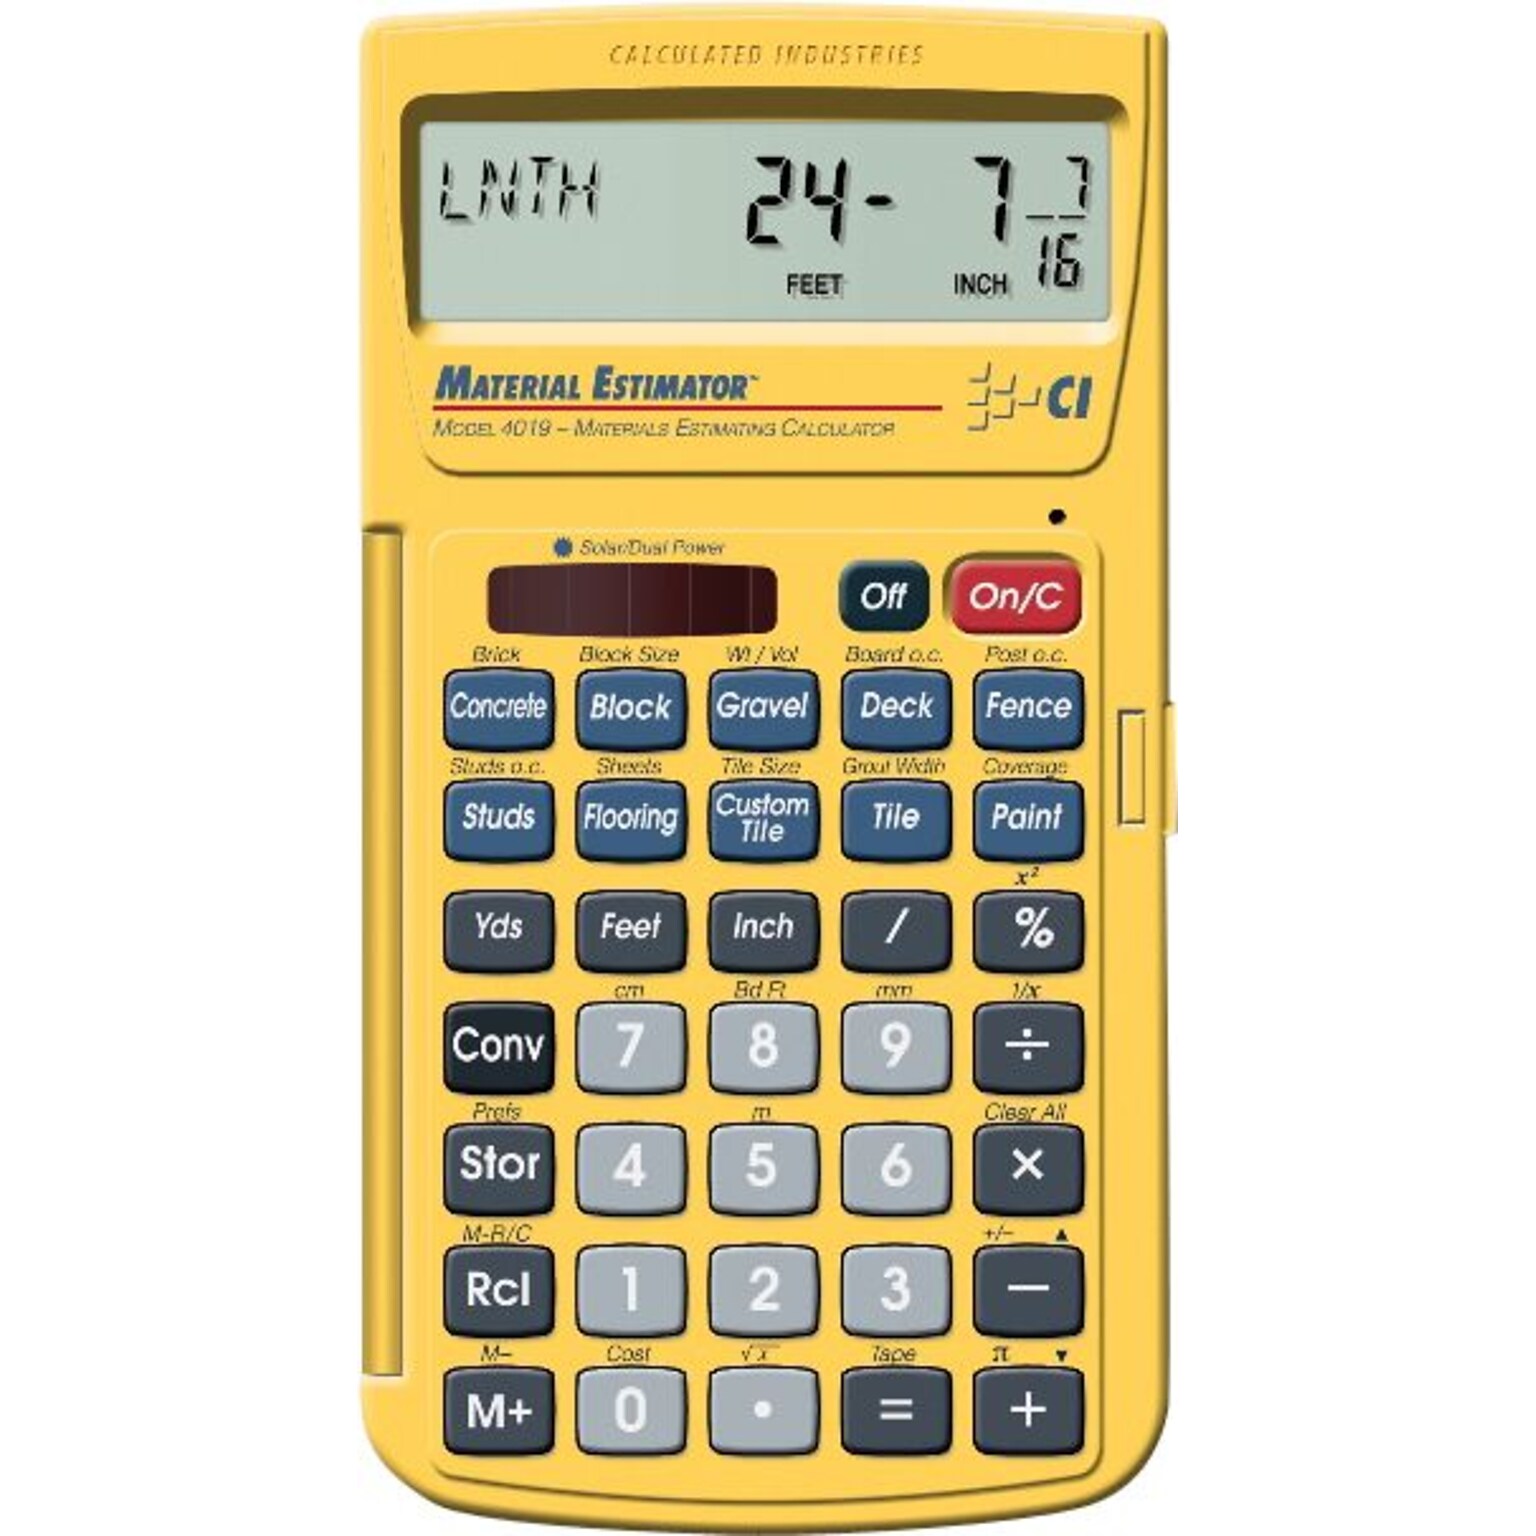 Calculated Industries 4019 Material Estimating Calculator, Yellow